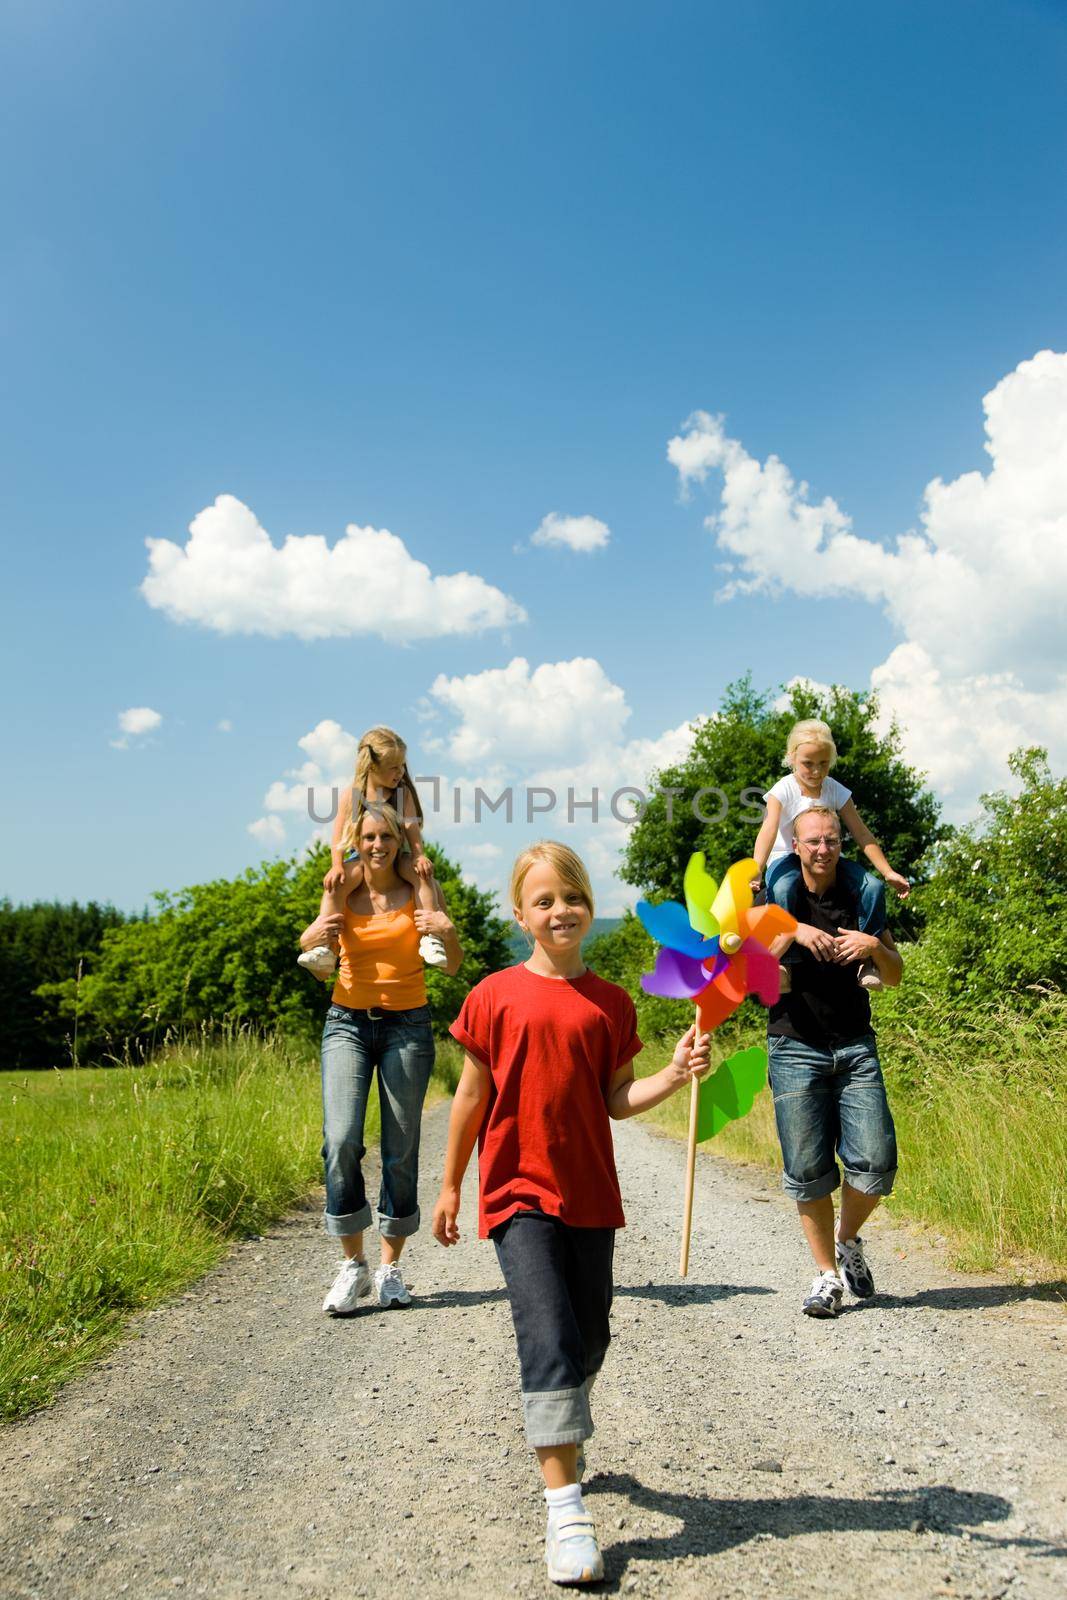 Family having a walk down a path on a sunny day under a perfect blue sky (focus is only on the girl in front!)